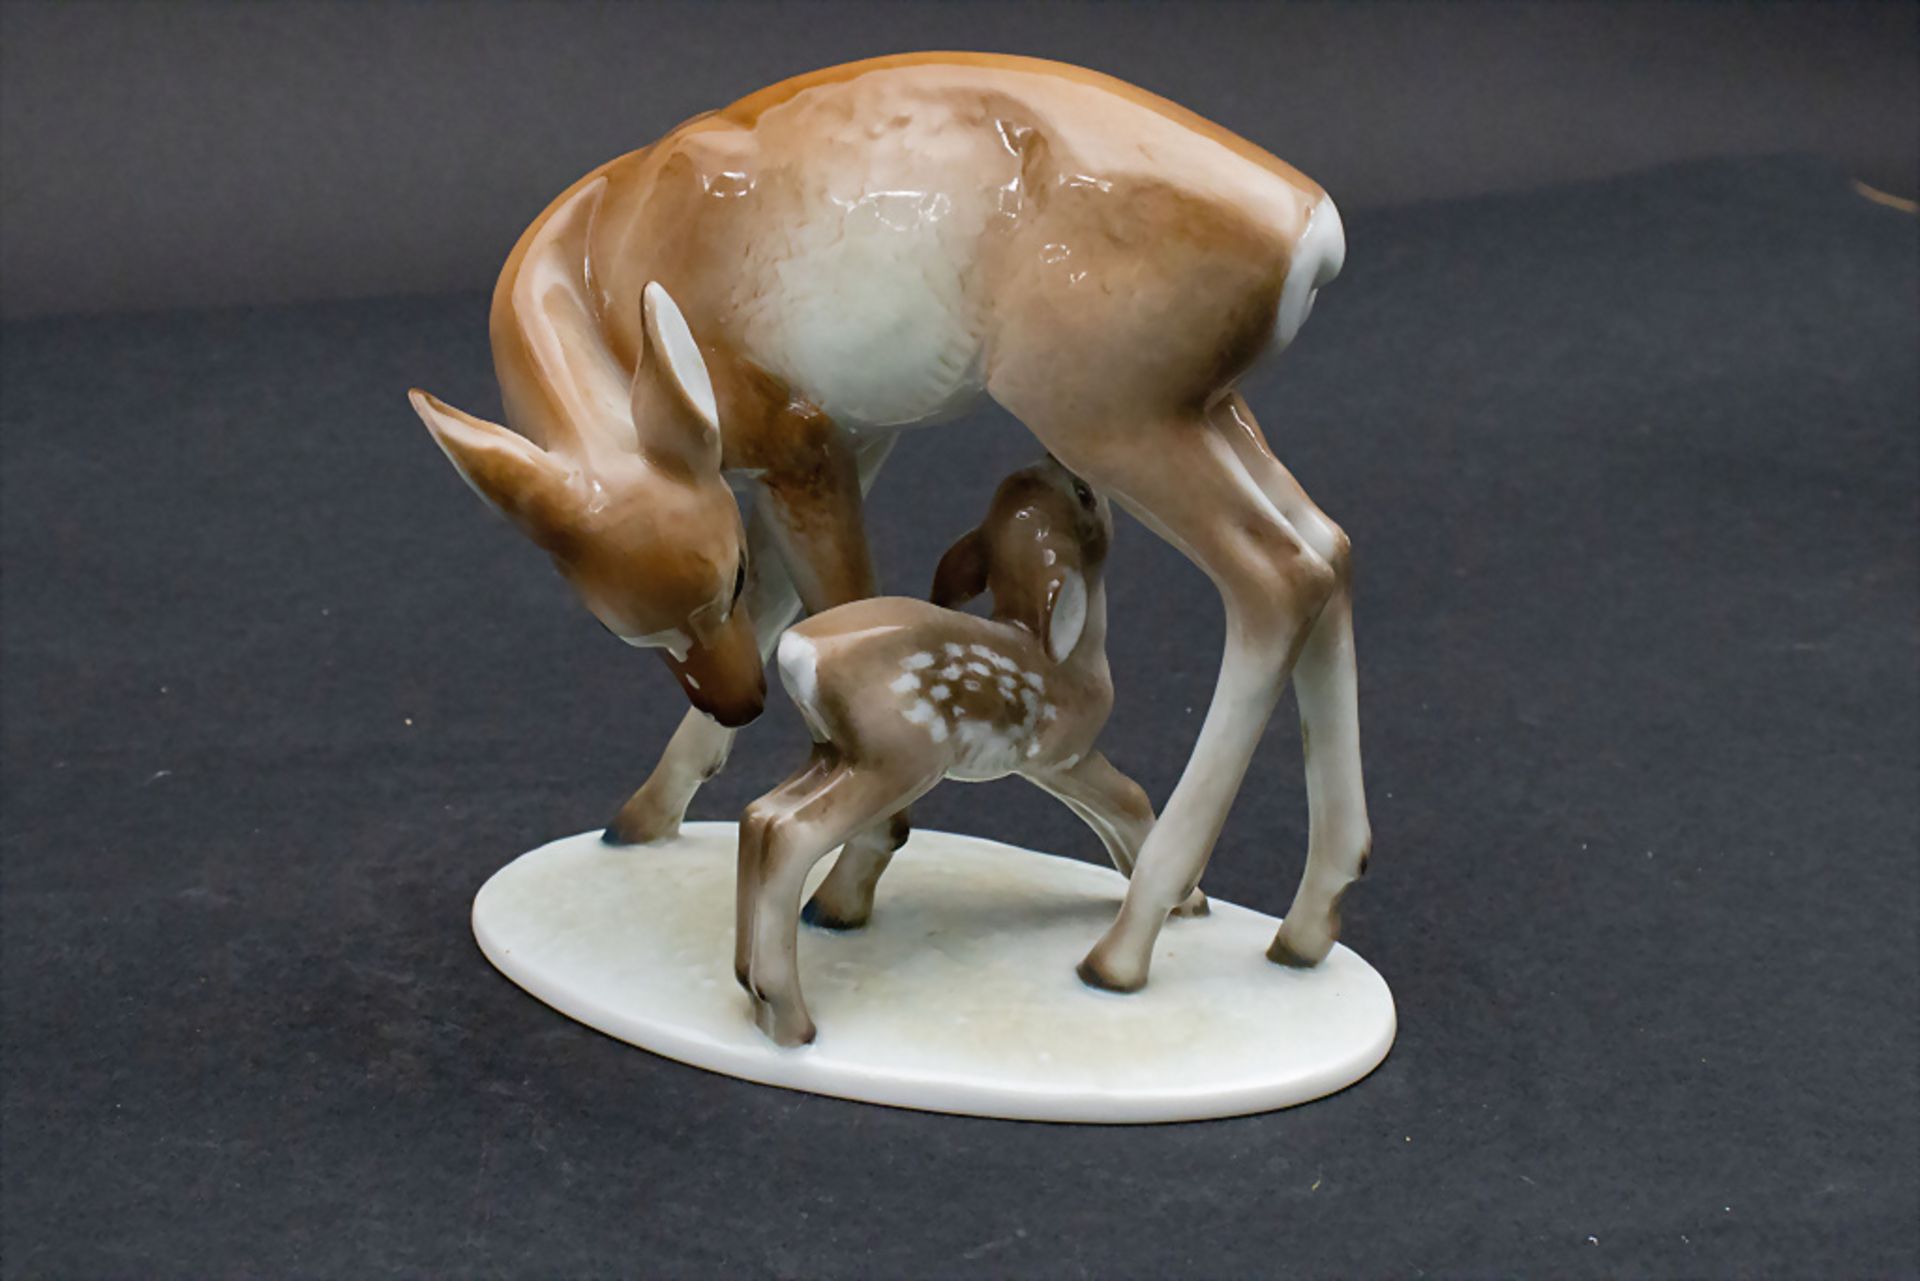 Reh mit Rehkitz / A deer with a fawn, Rudolf Rempel, Rosenthal, Selb, um 1937 - Image 6 of 7